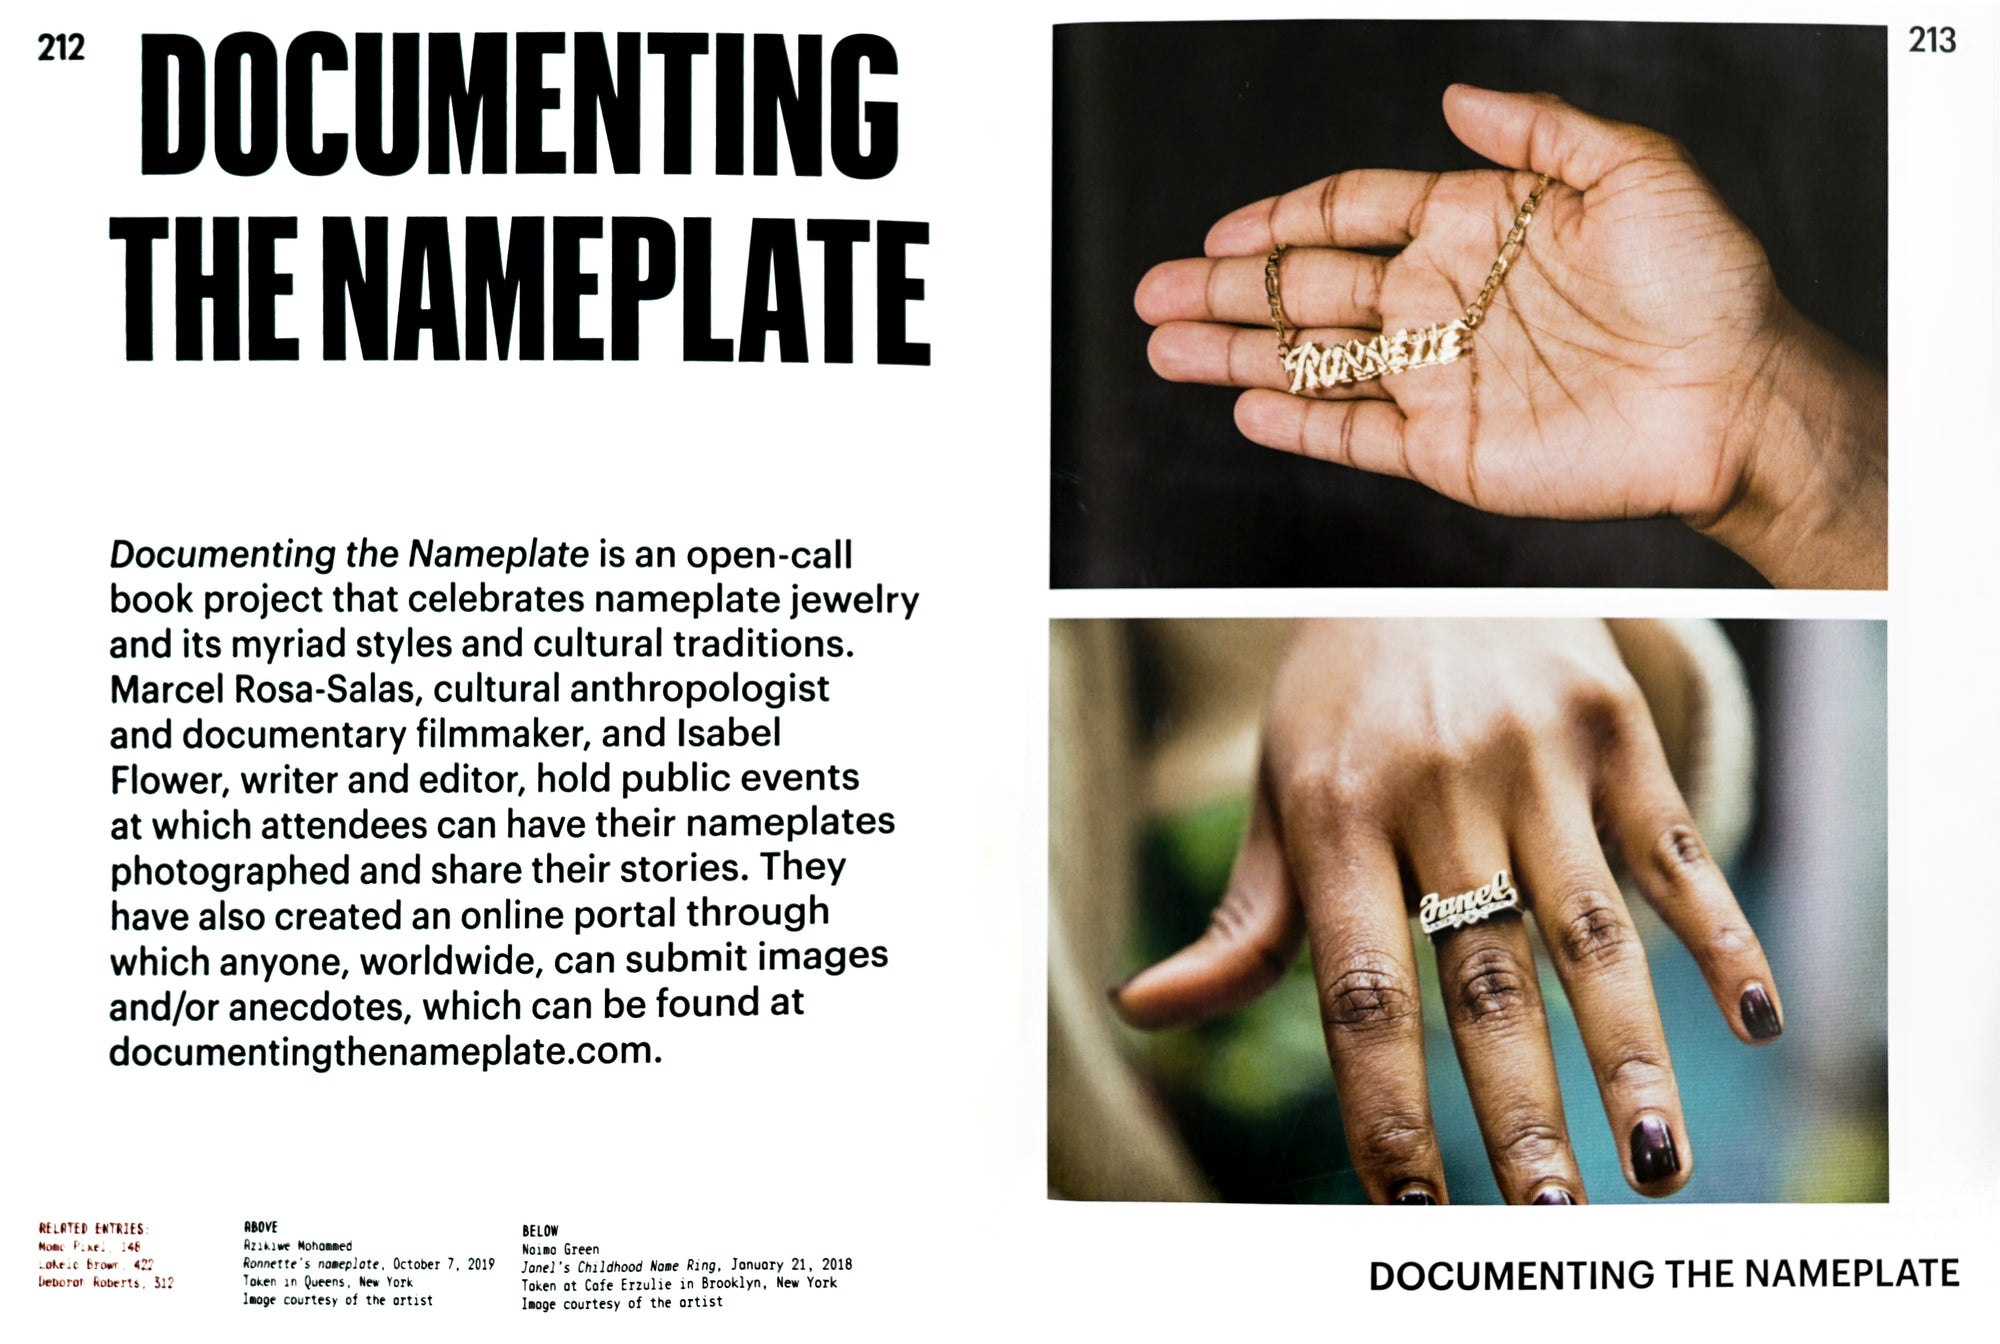 Book Spread: Serif type header and body text in black with two images one hand holding gold nameplate necklace and the other showing a nameplate ring